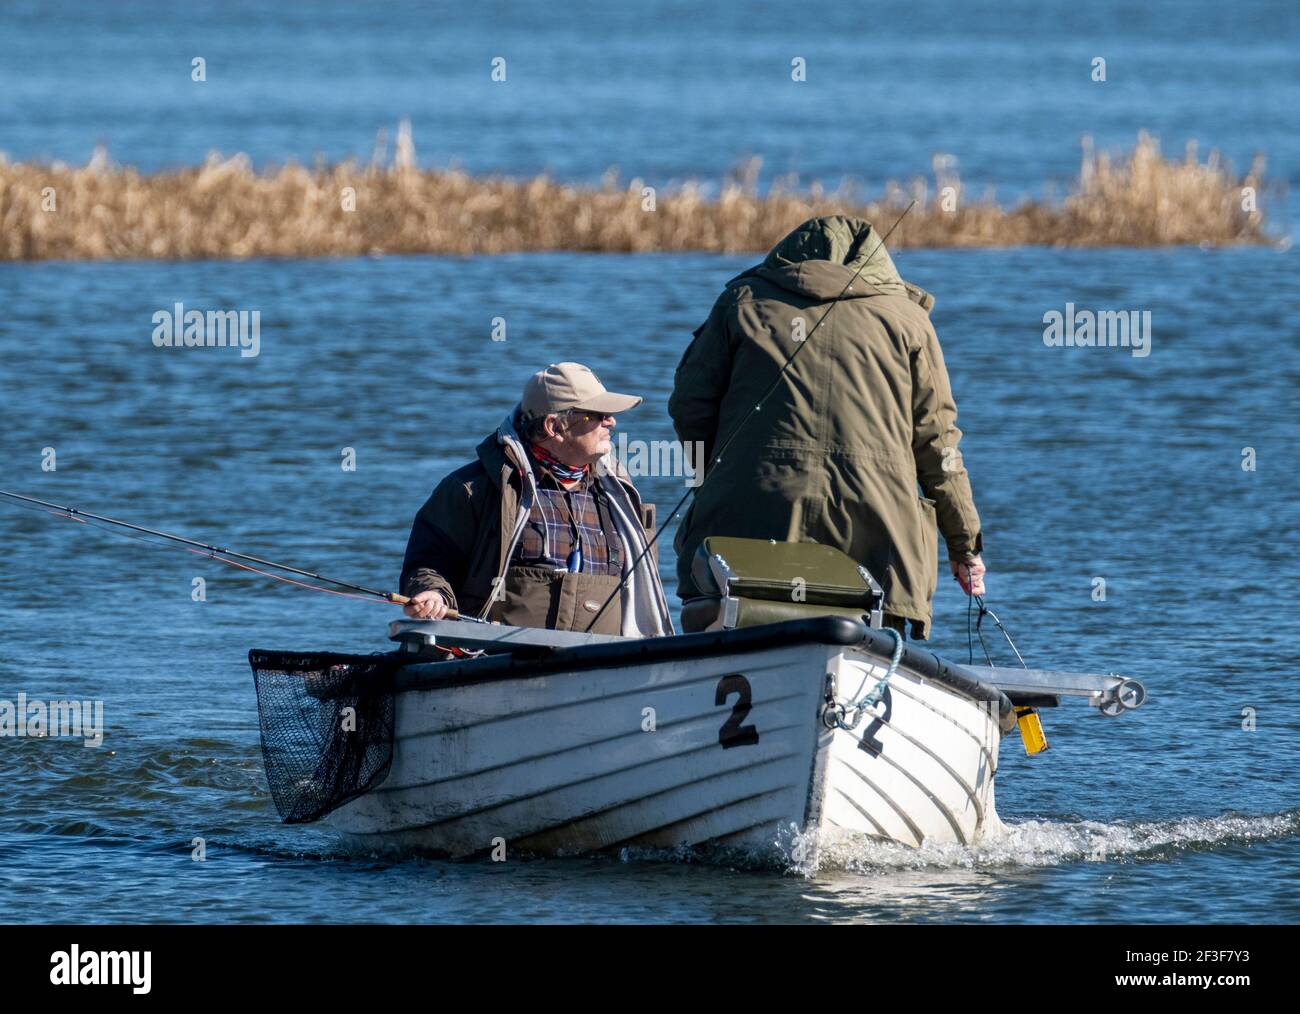 https://c8.alamy.com/comp/2F3F7Y3/men-fly-fishing-from-boats-on-linlithgow-loch-with-linlithgow-palace-behind-2F3F7Y3.jpg